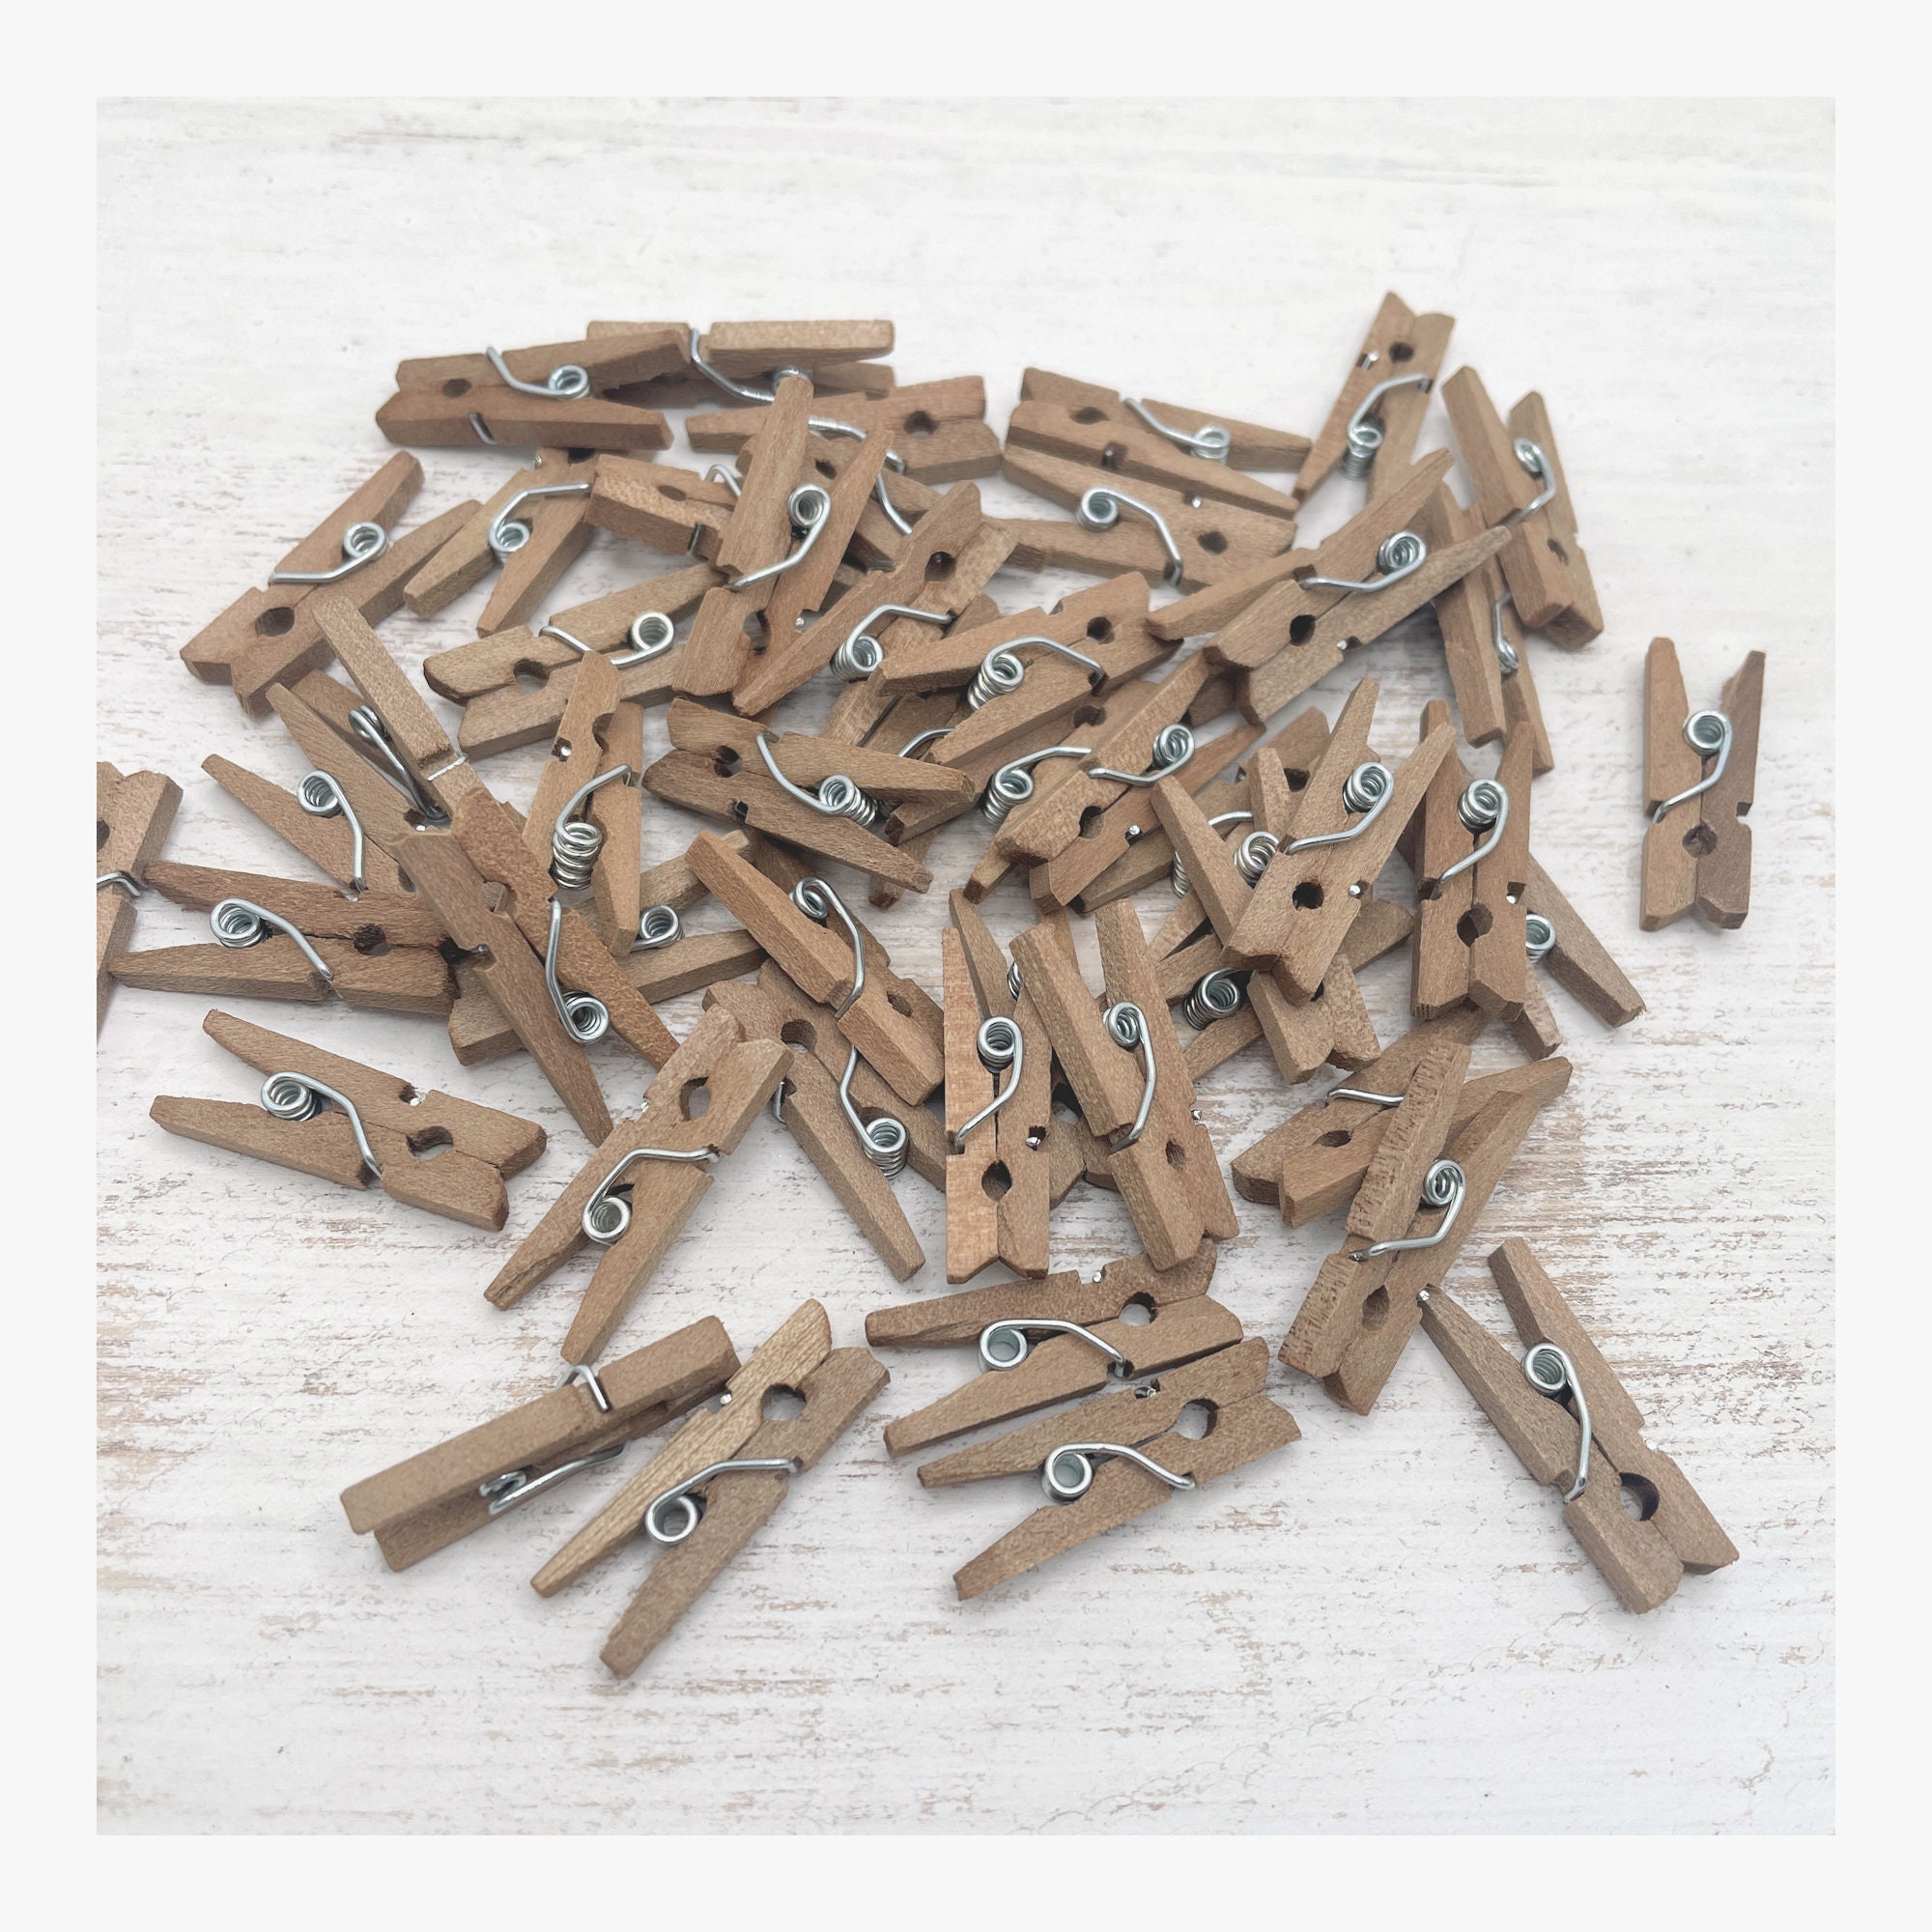 Small Clothes Pins, Mini Wooden Clothespins, Little Clothespegs, Ti, MiniatureSweet, Kawaii Resin Crafts, Decoden Cabochons Supplies